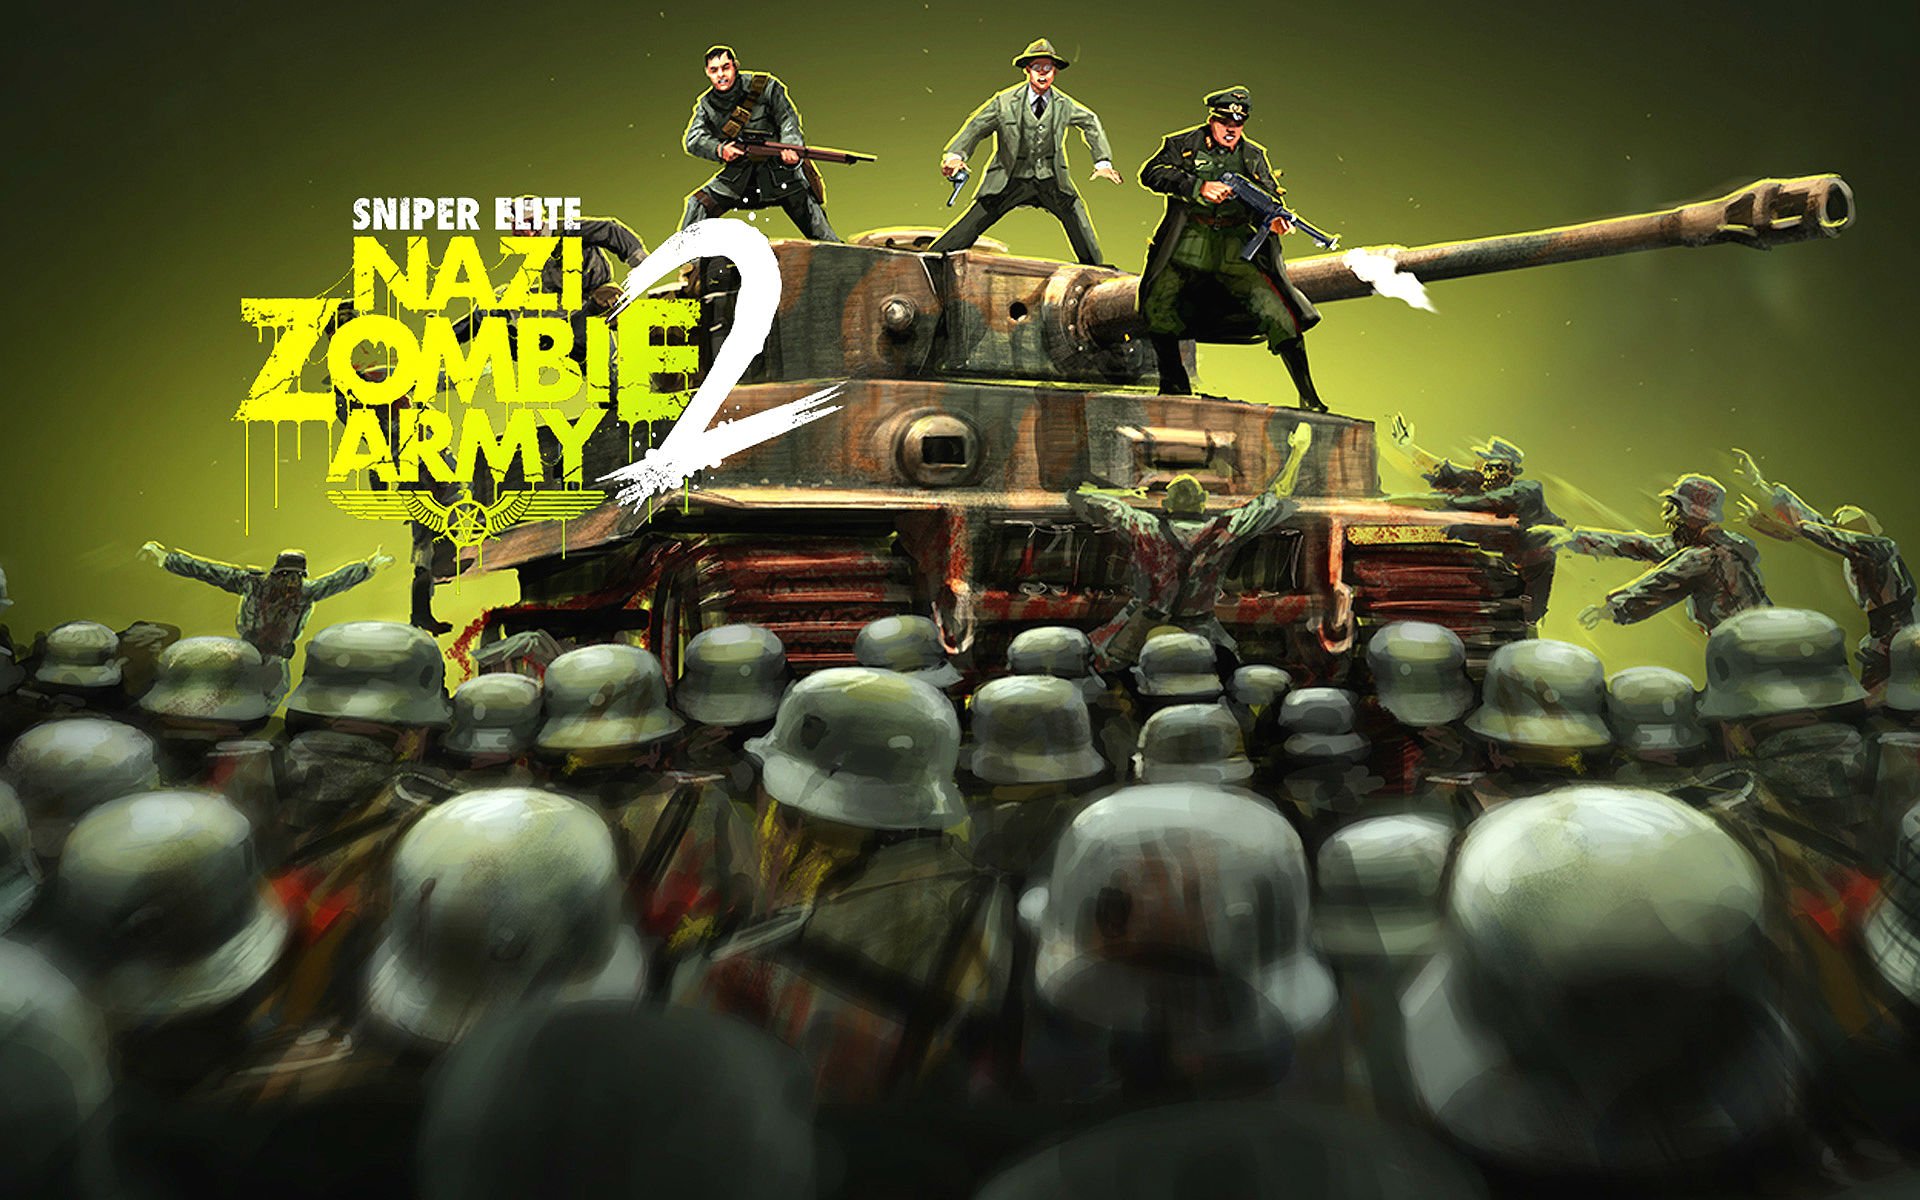 Zombie Army Trilogy Wallpapers